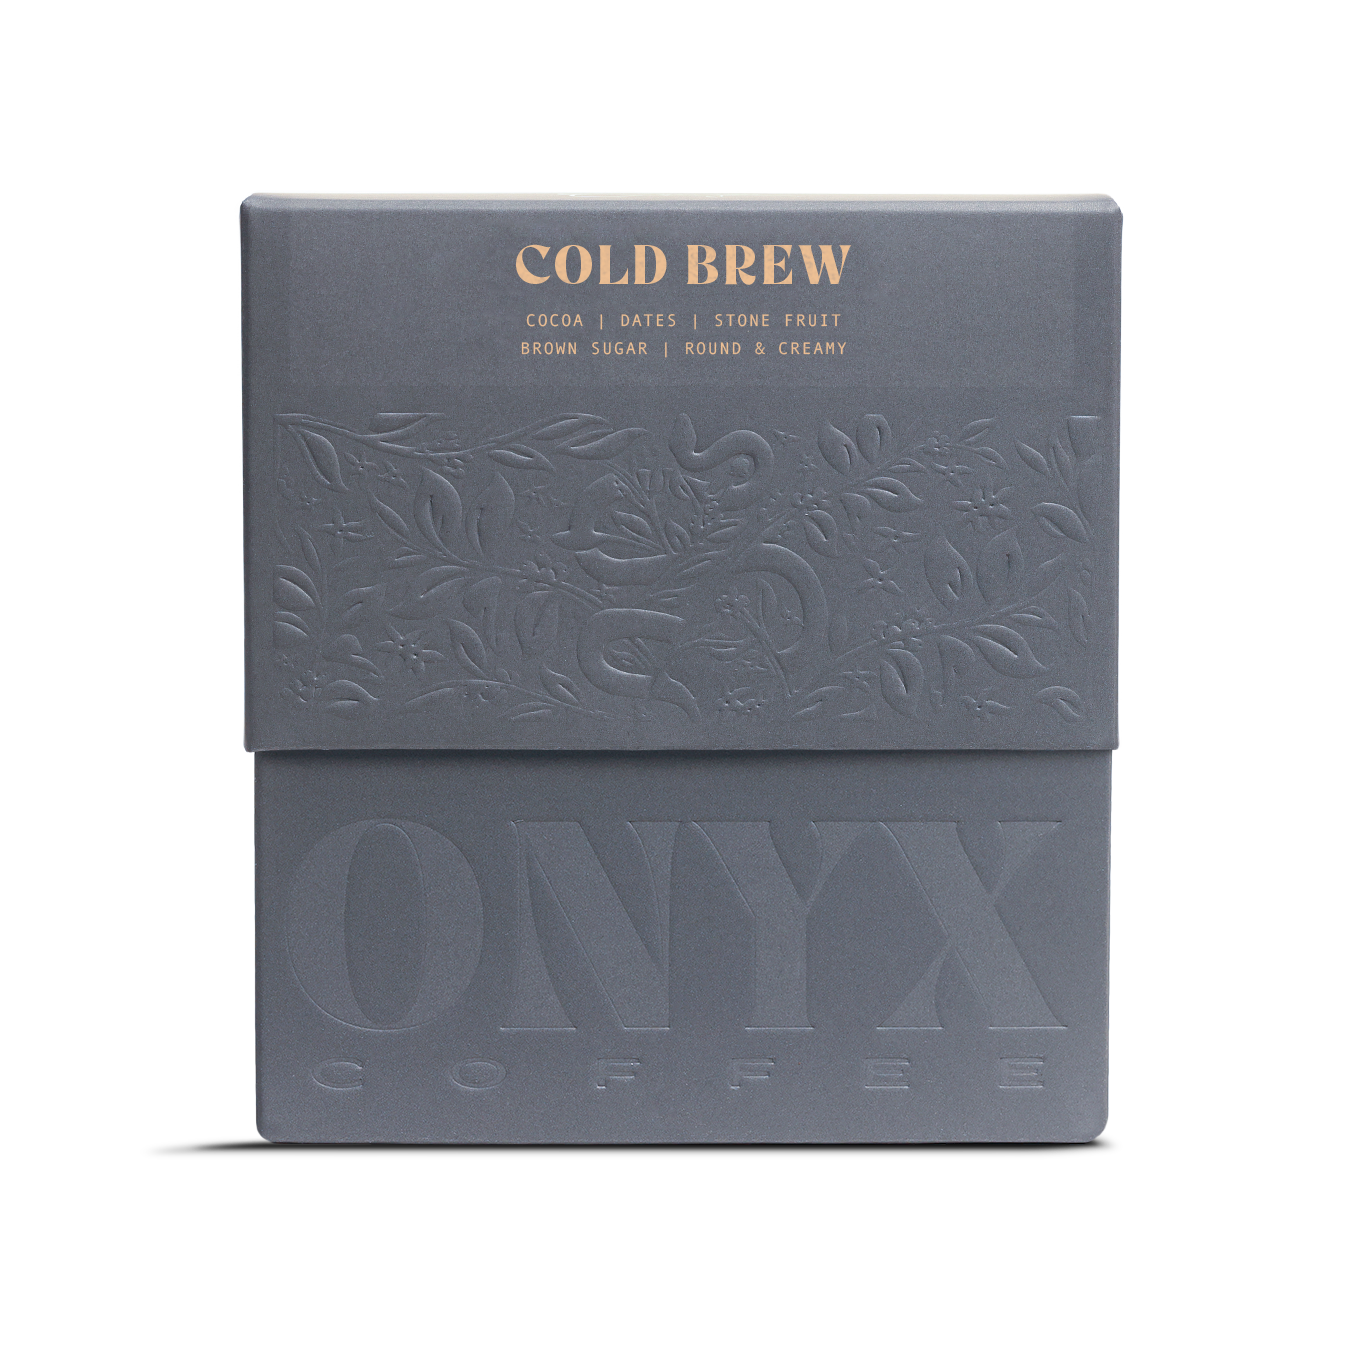 Cold Brew (Whole Bean) by Onyx Coffee Lab